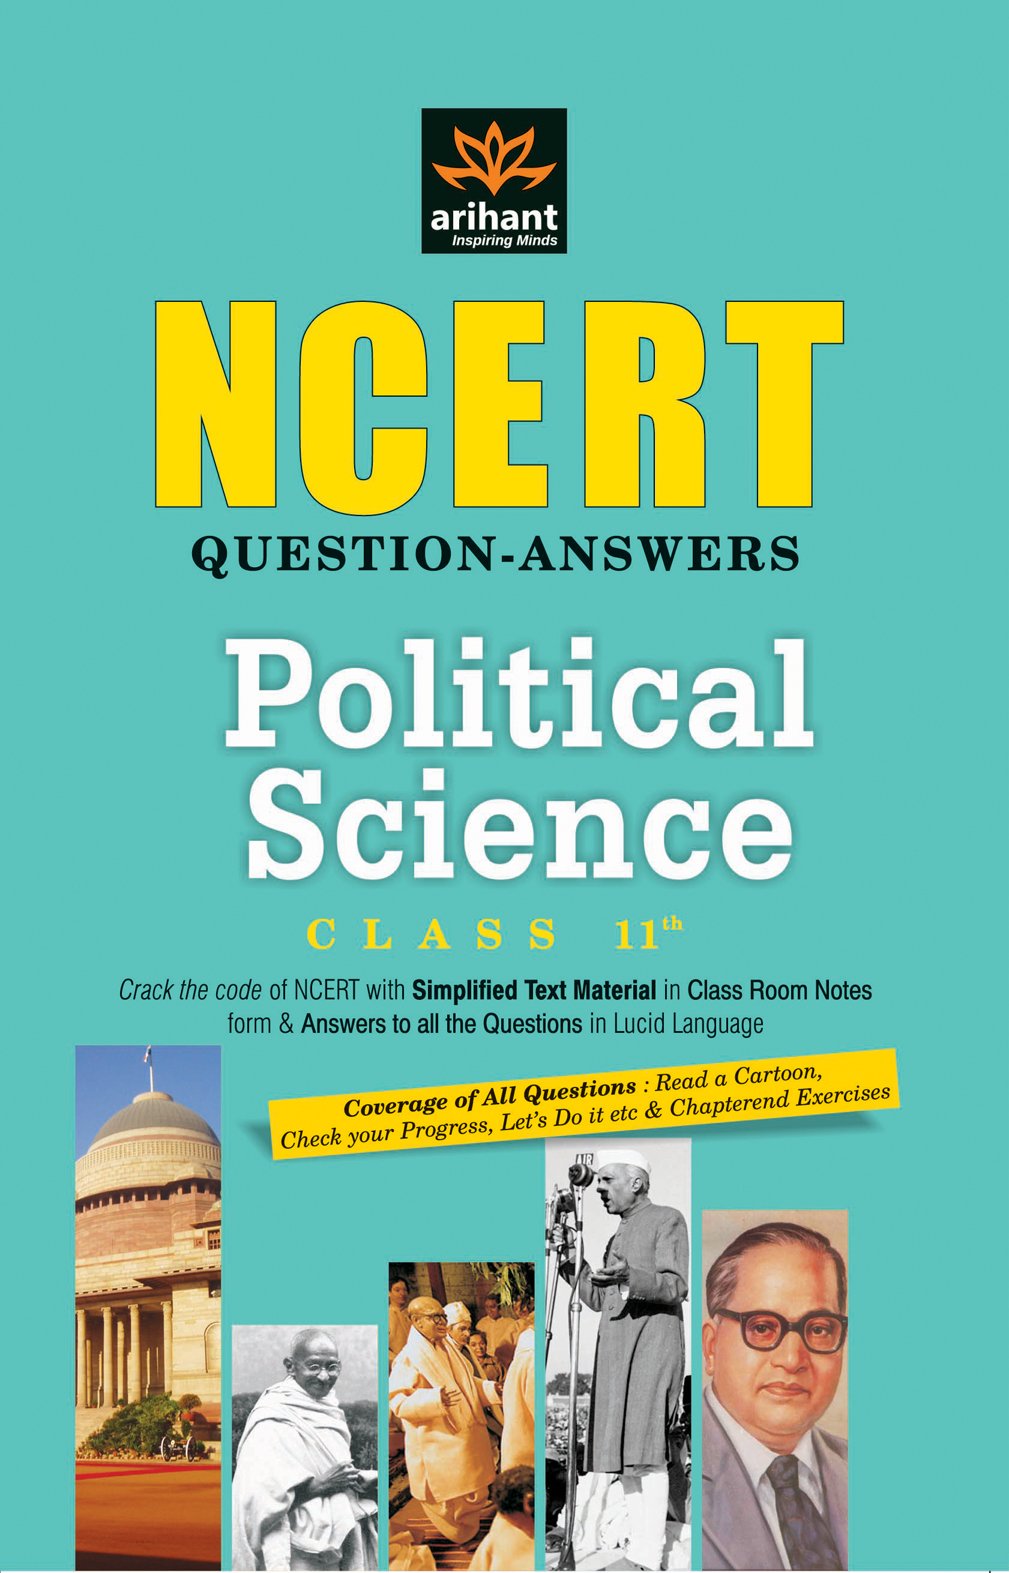 NCERT Question-Answers Political Science Class 11th